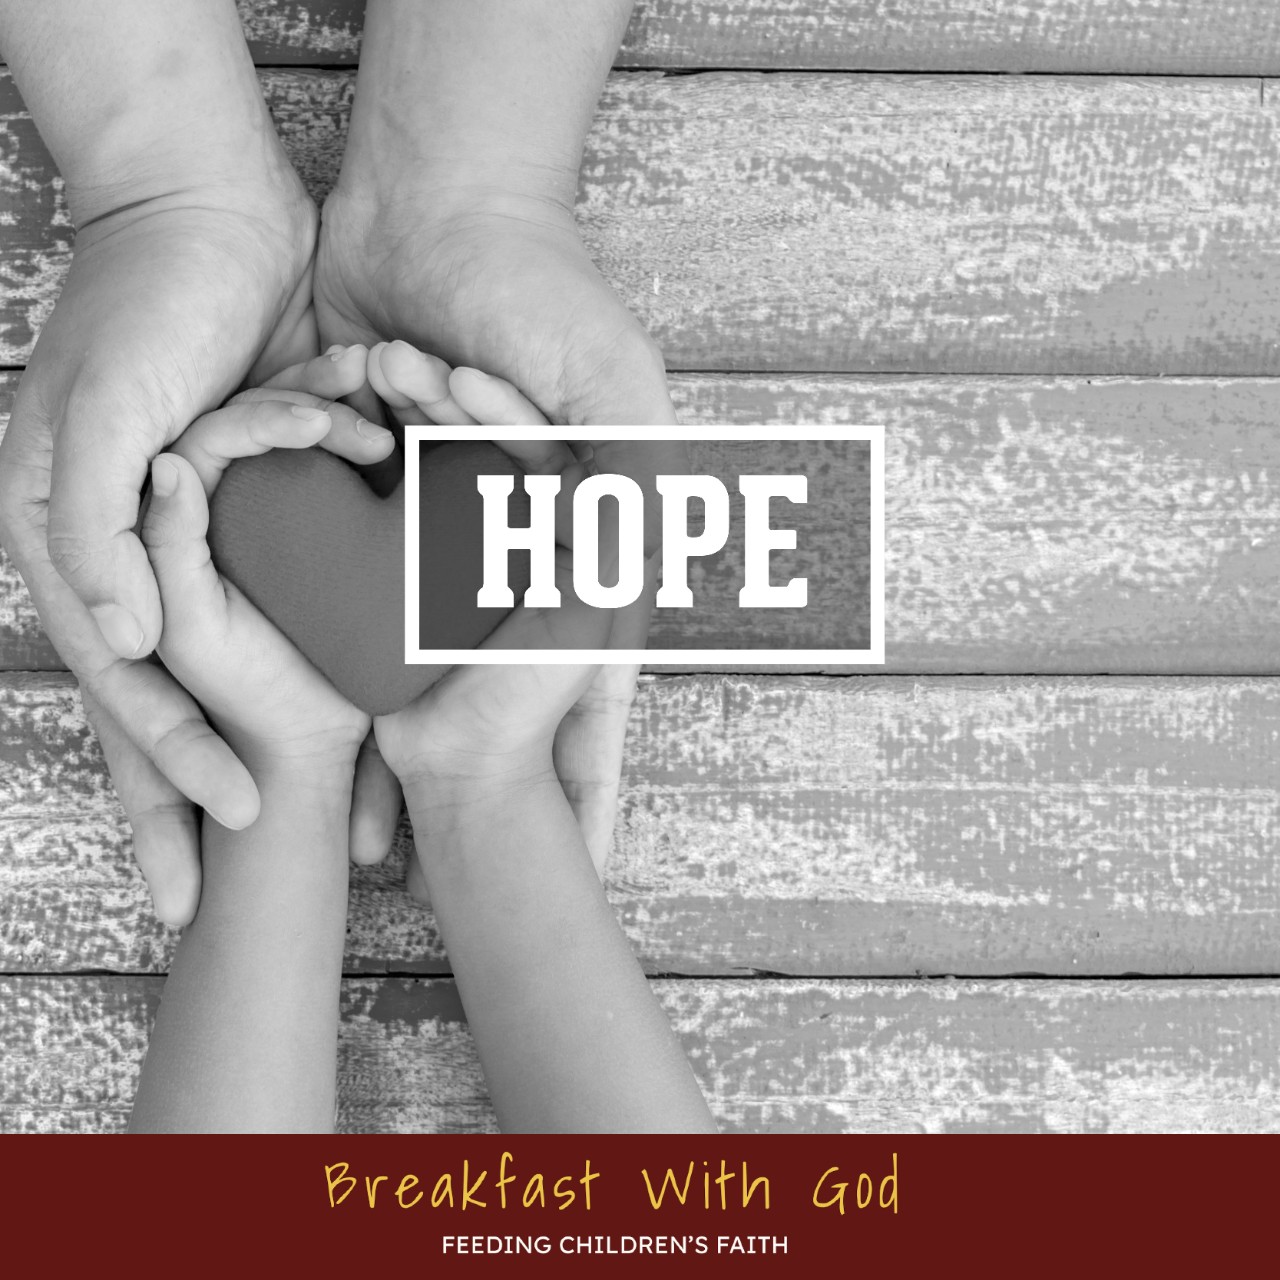 Breakfast With God: Hope